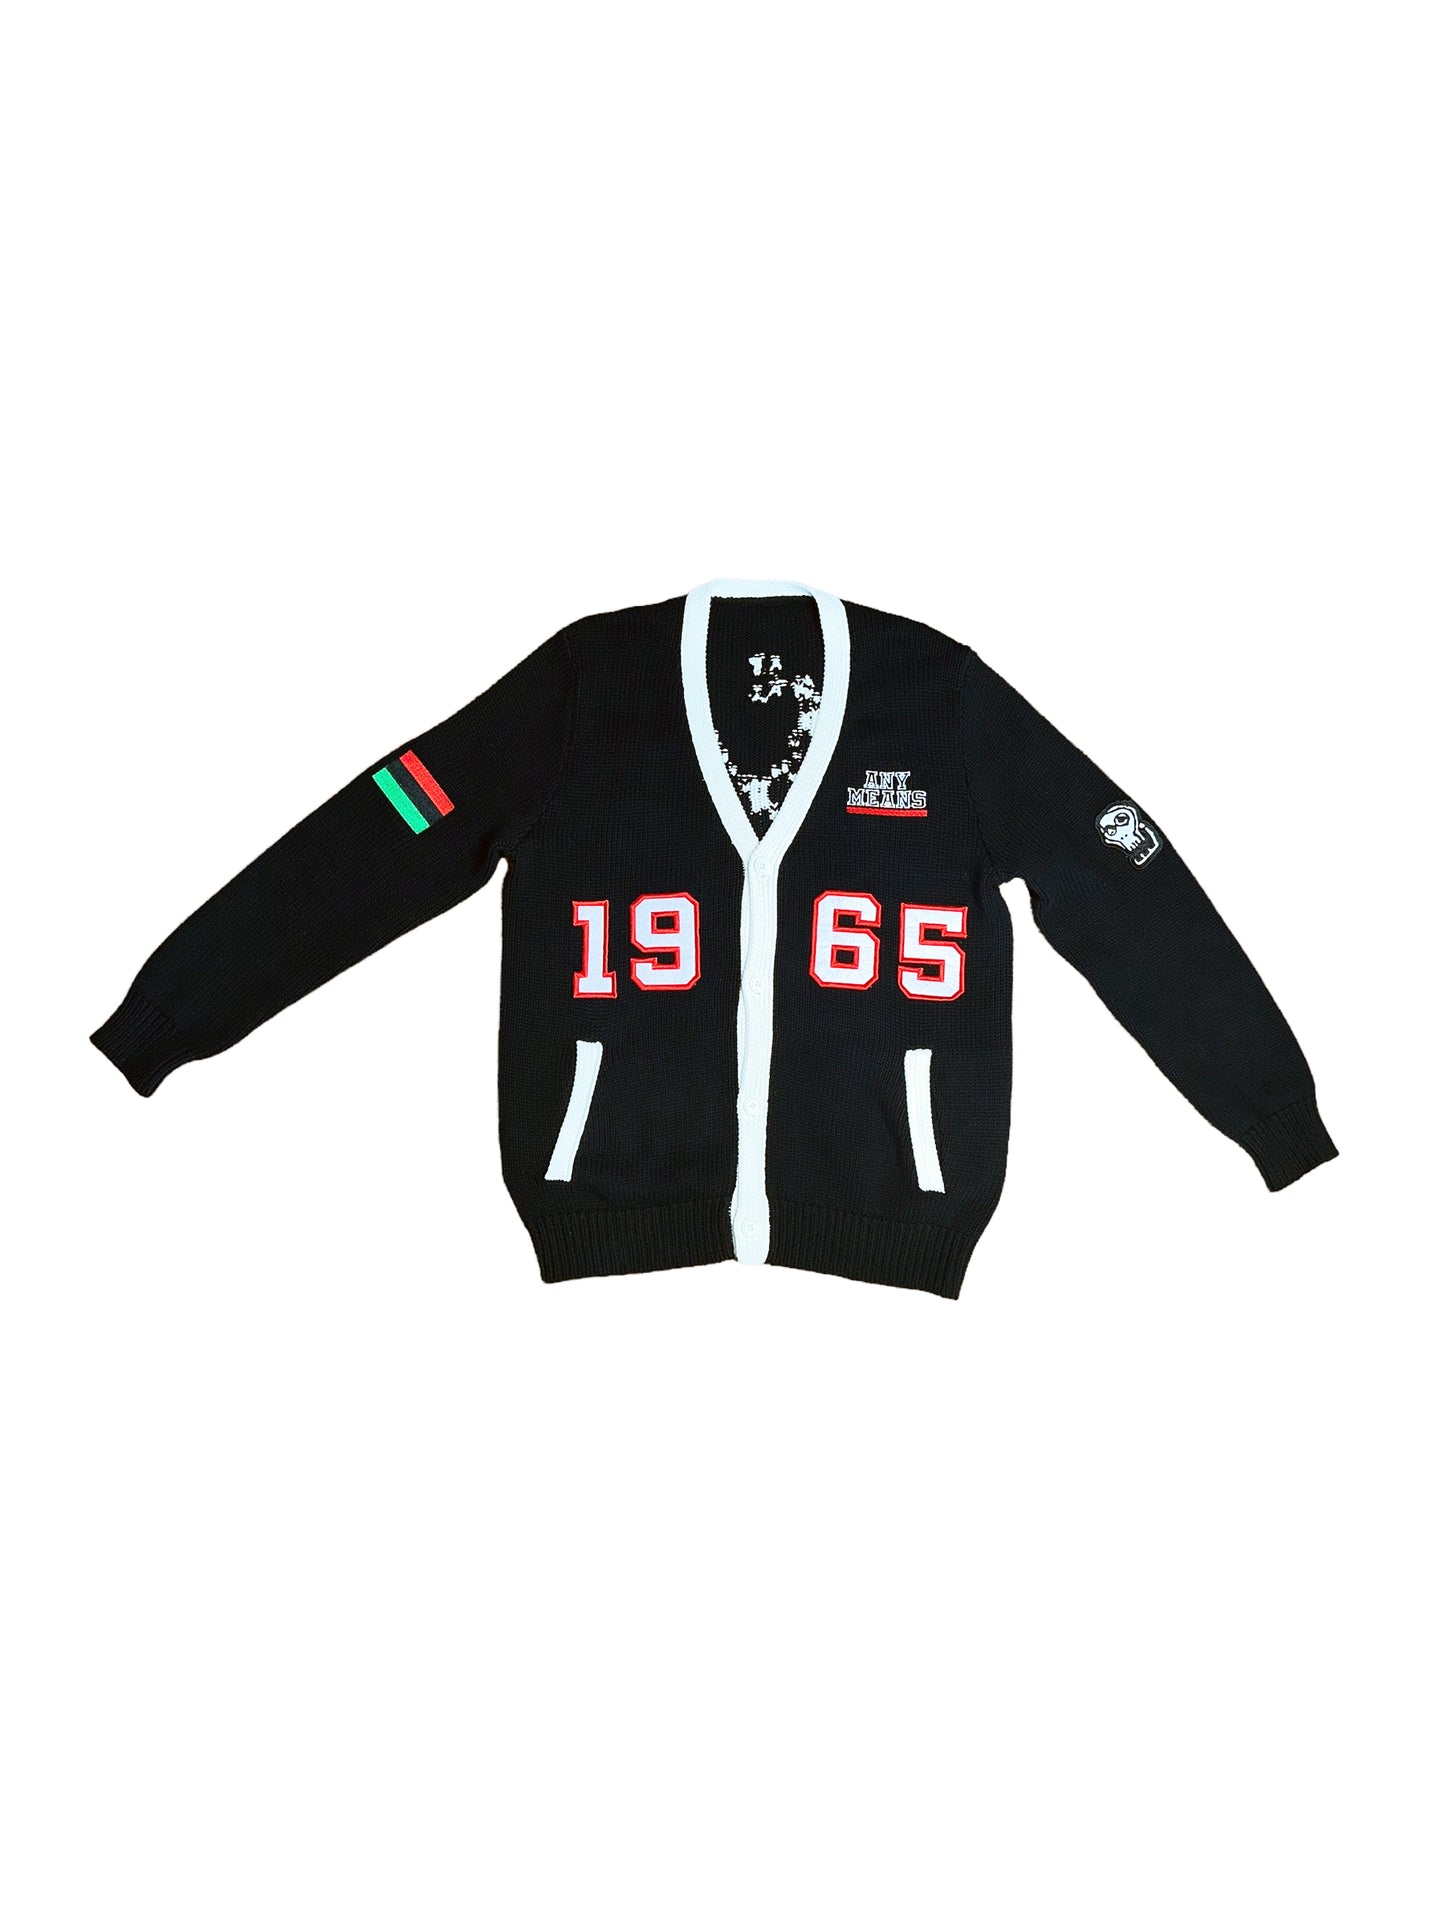 ANY MEANS Malcolm X 1965 Varsity Knitted Set